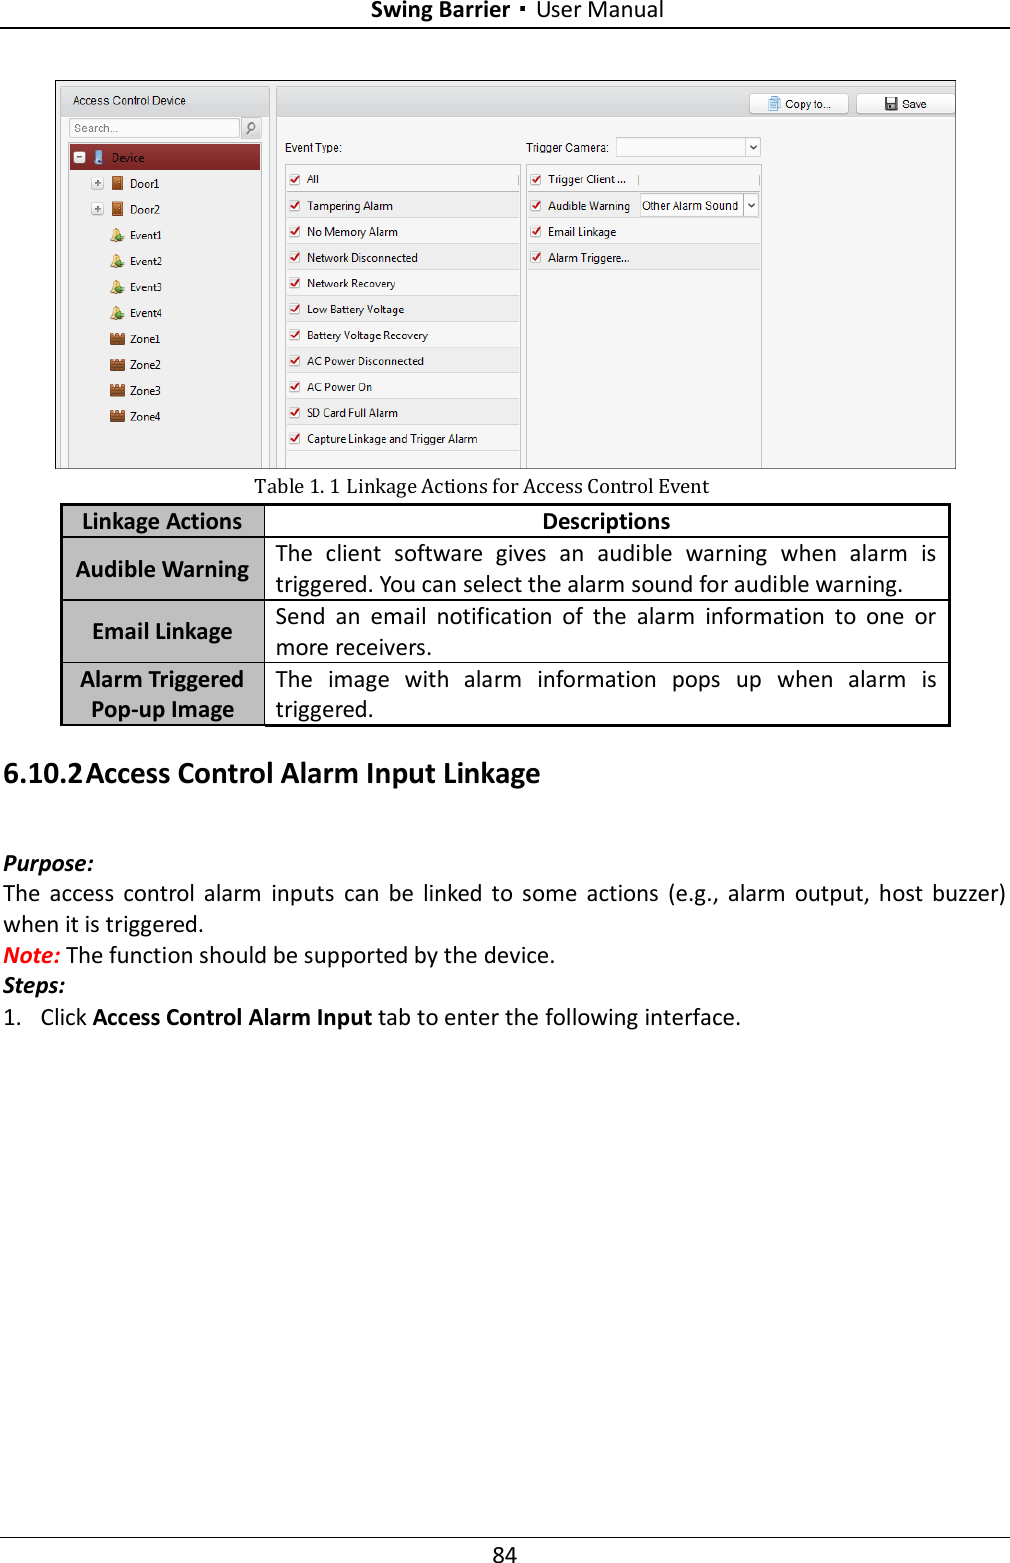 Swing Barrier·User Manual 84  Table 1. 1 Linkage Actions for Access Control Event Linkage Actions Descriptions Audible Warning The  client  software  gives  an  audible  warning  when  alarm  is triggered. You can select the alarm sound for audible warning.   Email Linkage Send  an  email  notification  of  the  alarm  information  to  one  or more receivers.   Alarm Triggered Pop-up Image The  image  with  alarm  information  pops  up  when  alarm  is triggered. 6.10.2 Access Control Alarm Input Linkage Purpose: The  access  control  alarm  inputs  can  be  linked  to  some  actions  (e.g.,  alarm  output,  host  buzzer) when it is triggered. Note: The function should be supported by the device. Steps: 1. Click Access Control Alarm Input tab to enter the following interface.   